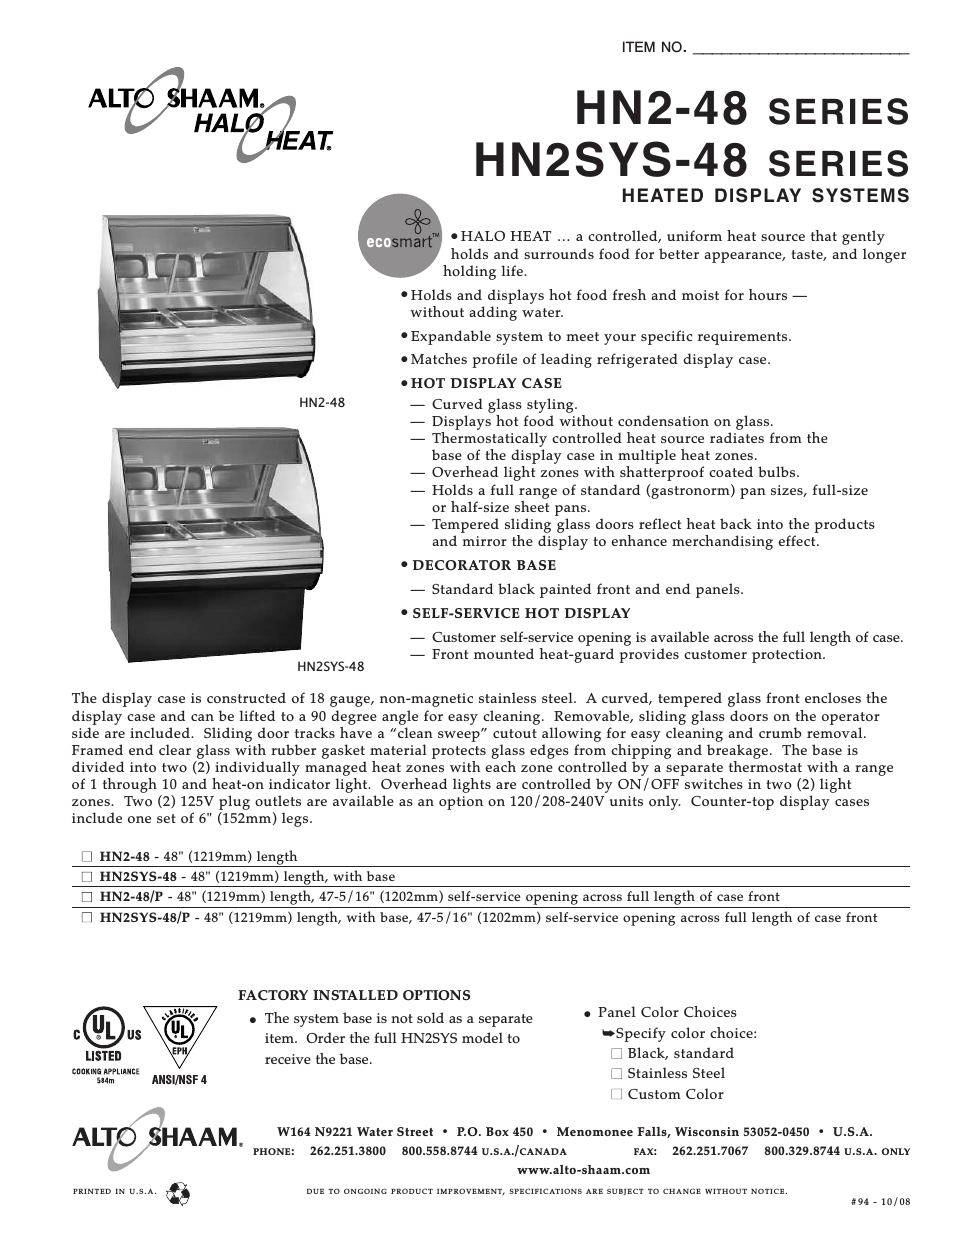 Heated Display Systems HN2SYS-48